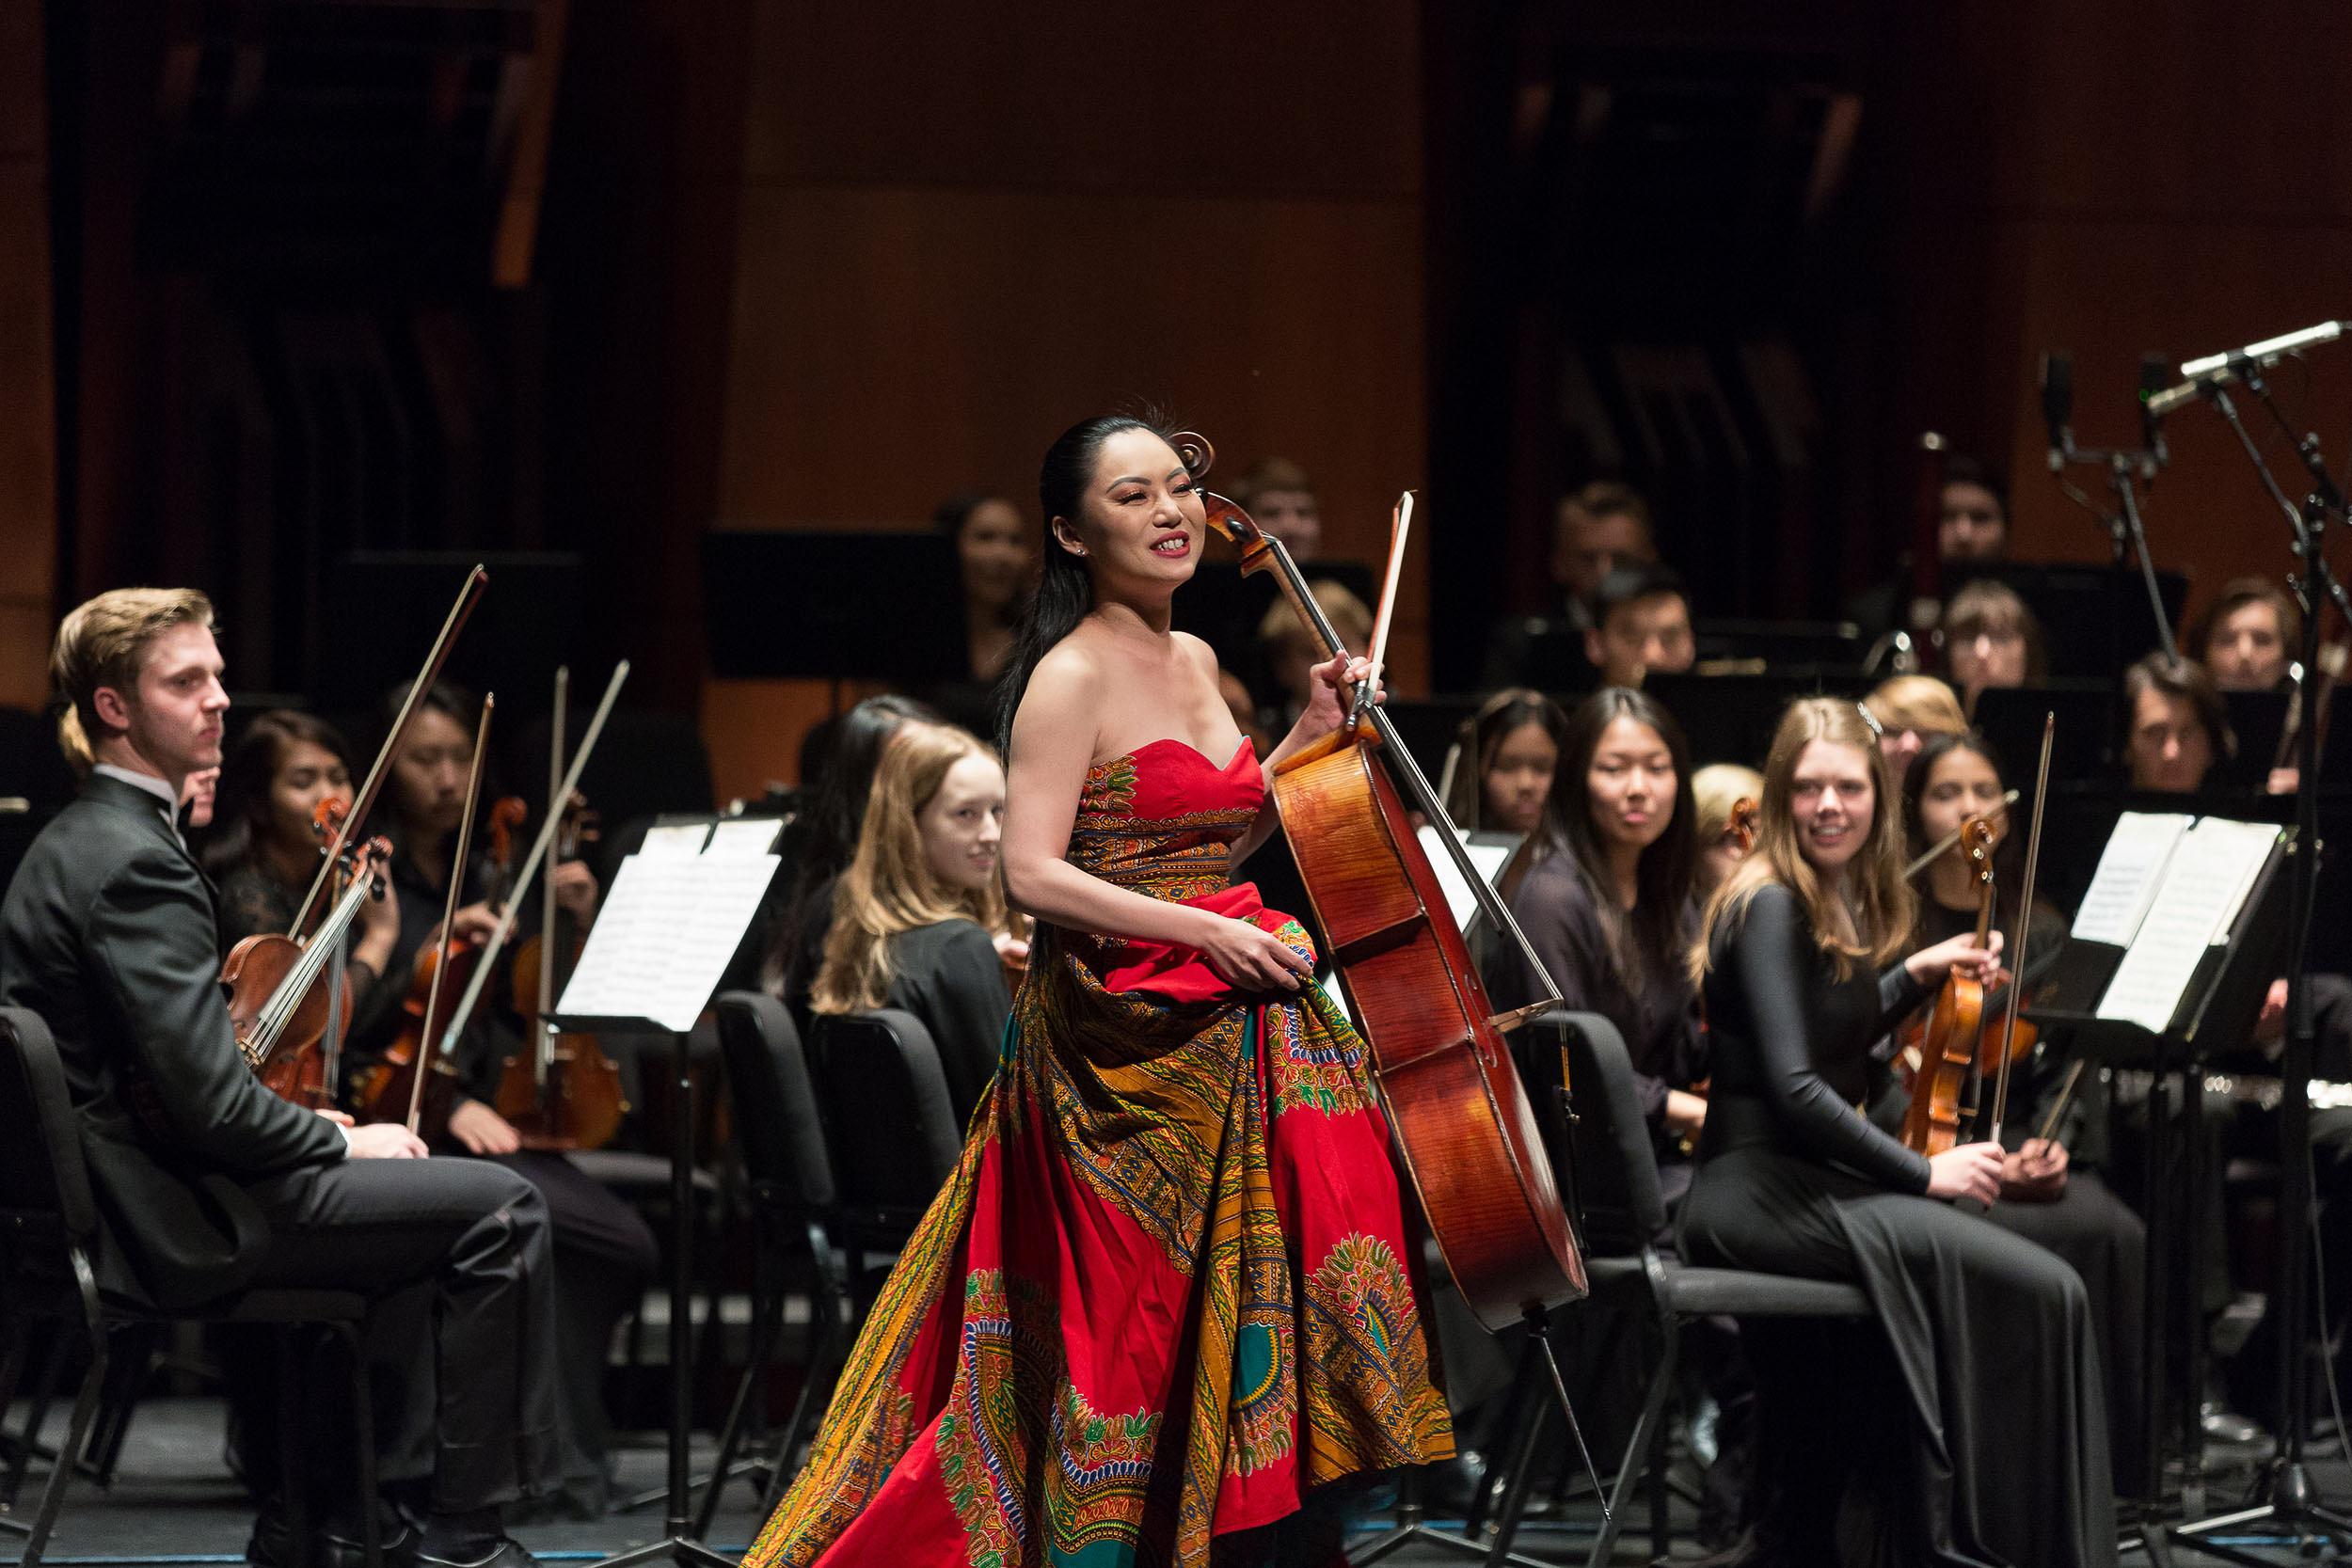  Cellist  Tina Guo  performs with the  San Diego Civic Youth Orchestra.  Presented by The California Center for the Arts, Escondido. 